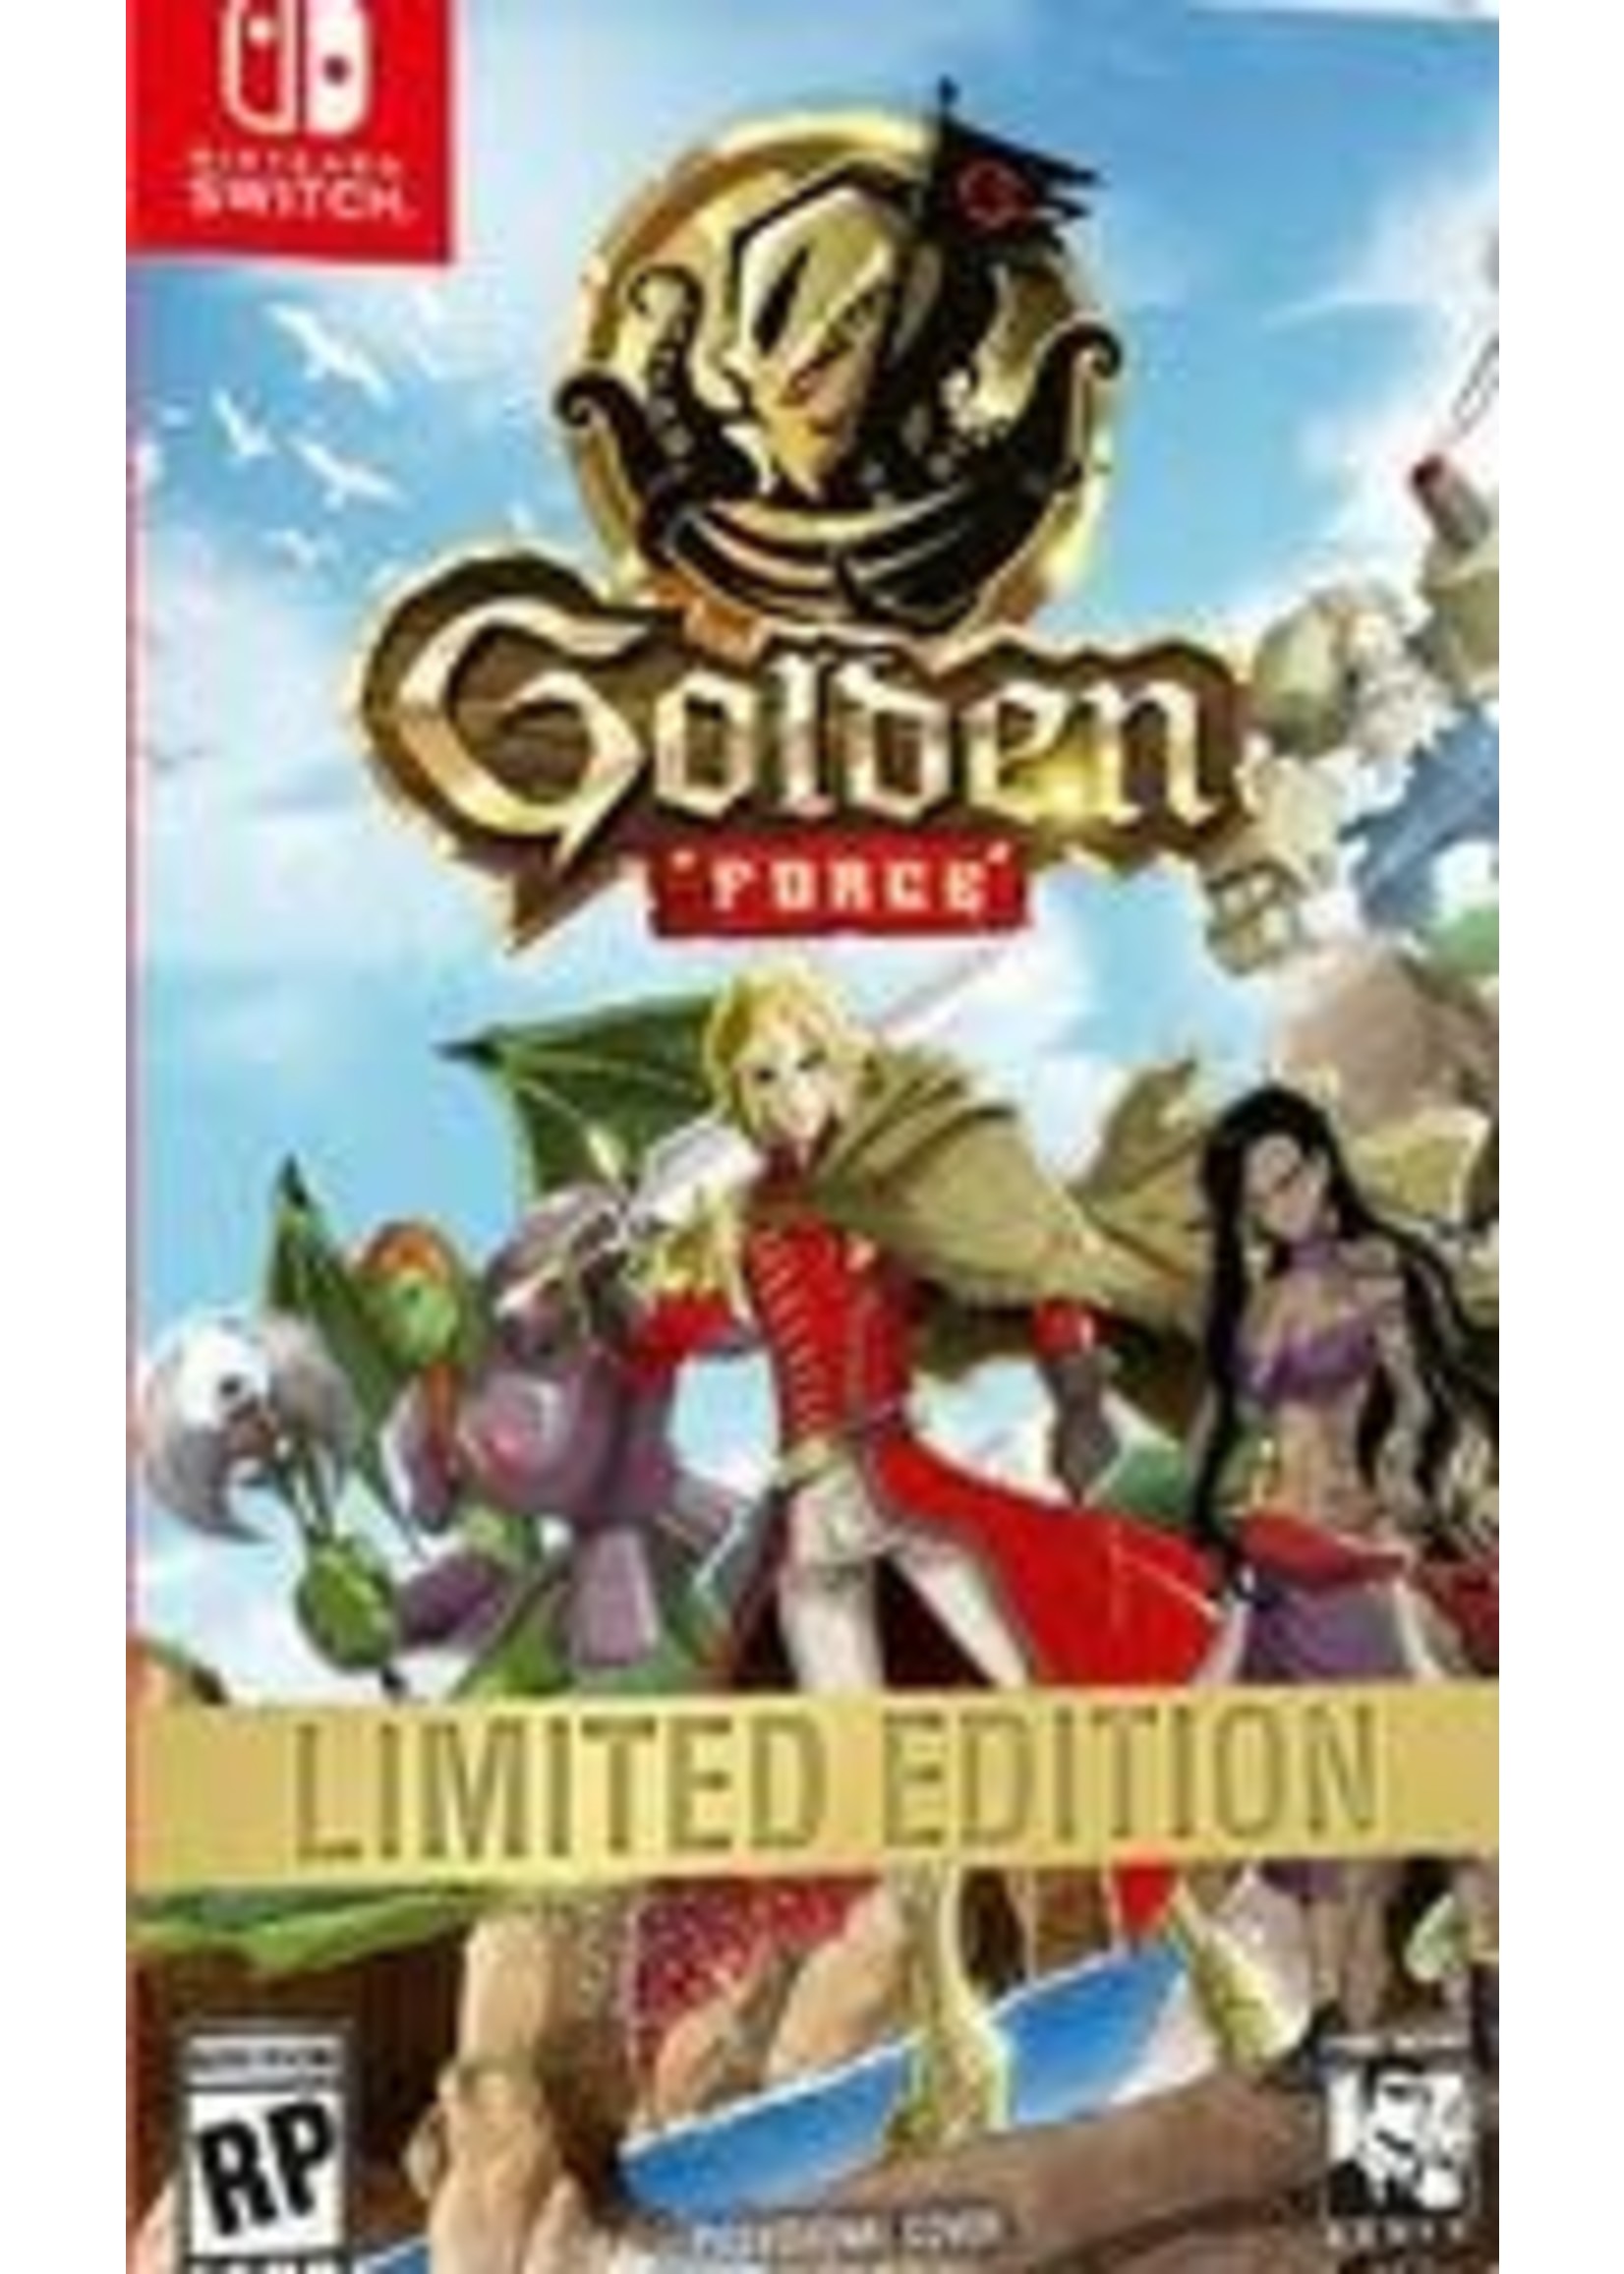 GOLDEN FORCE LIMITED EDITION SWITCH